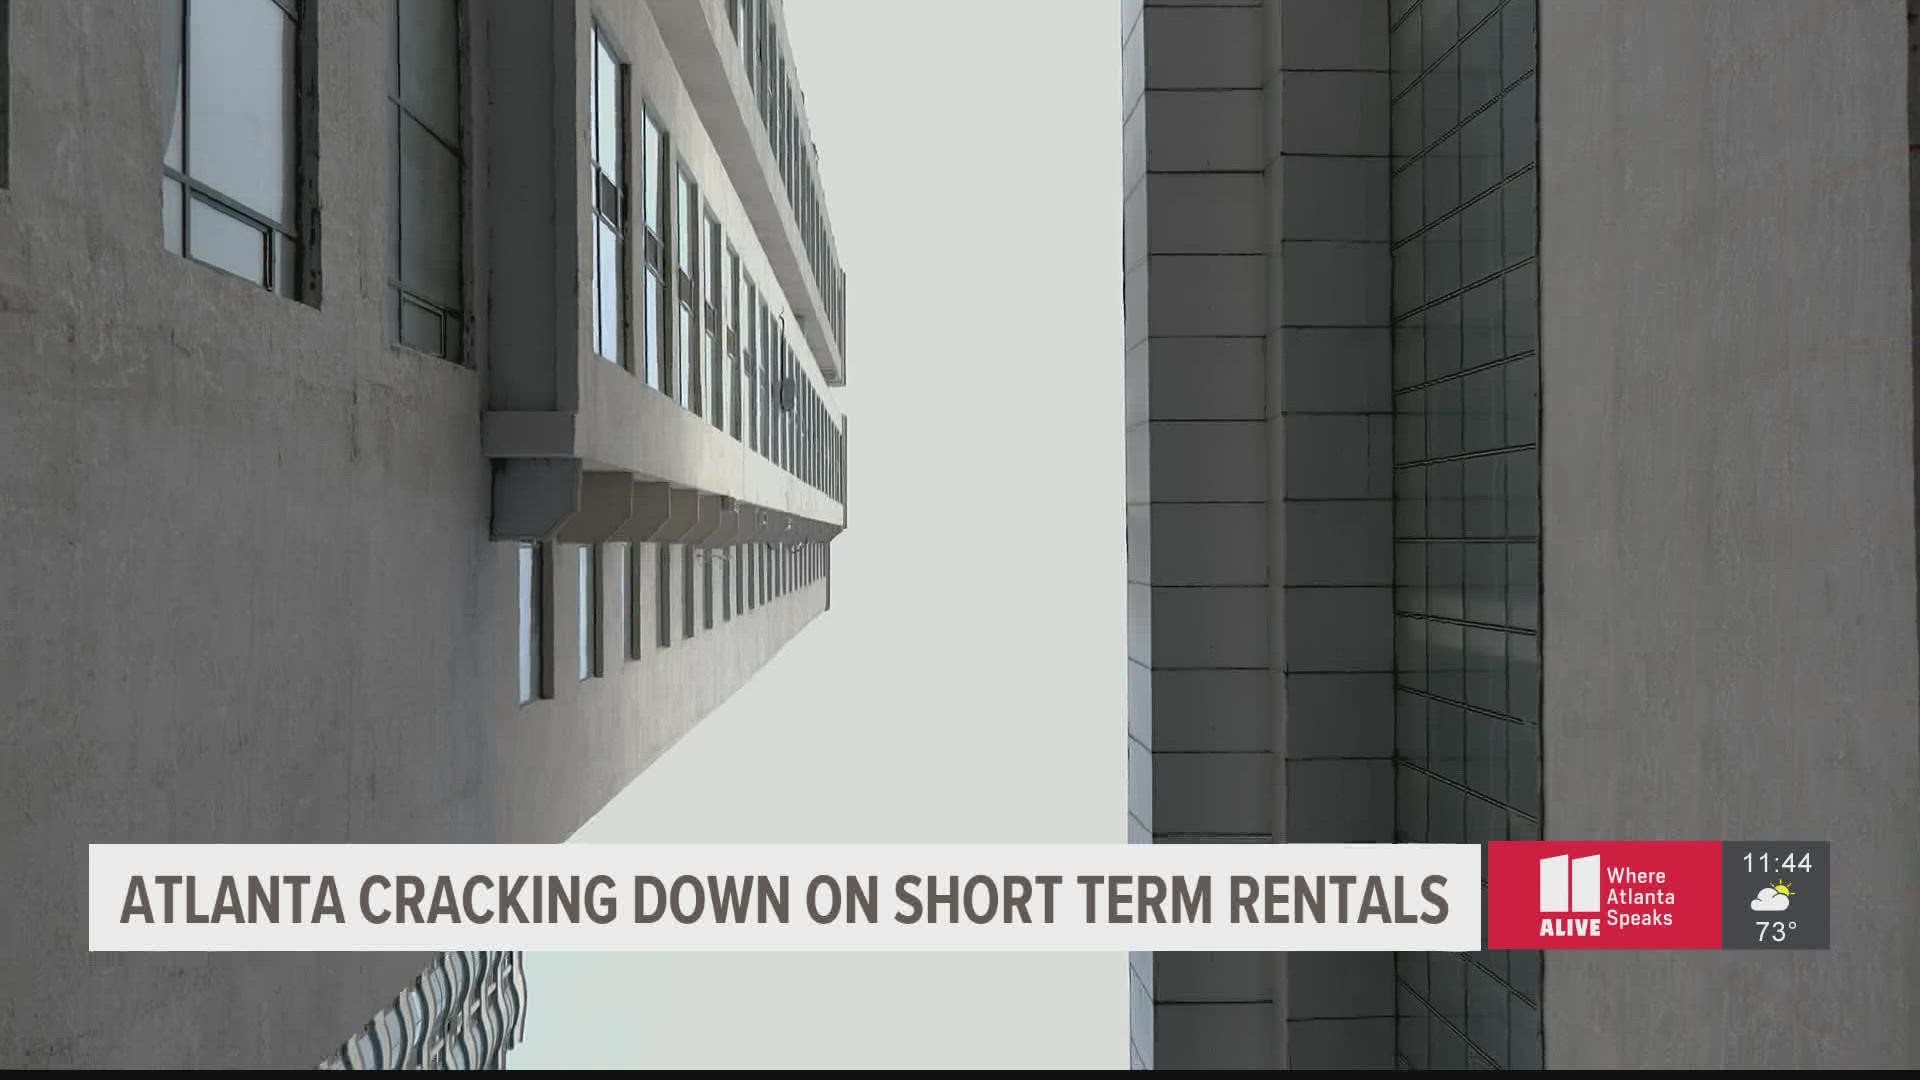 More than 4,000 short-term rentals could soon disappear from Atlanta, because of a new ordinance cracking down on who’s able to rent out their home.